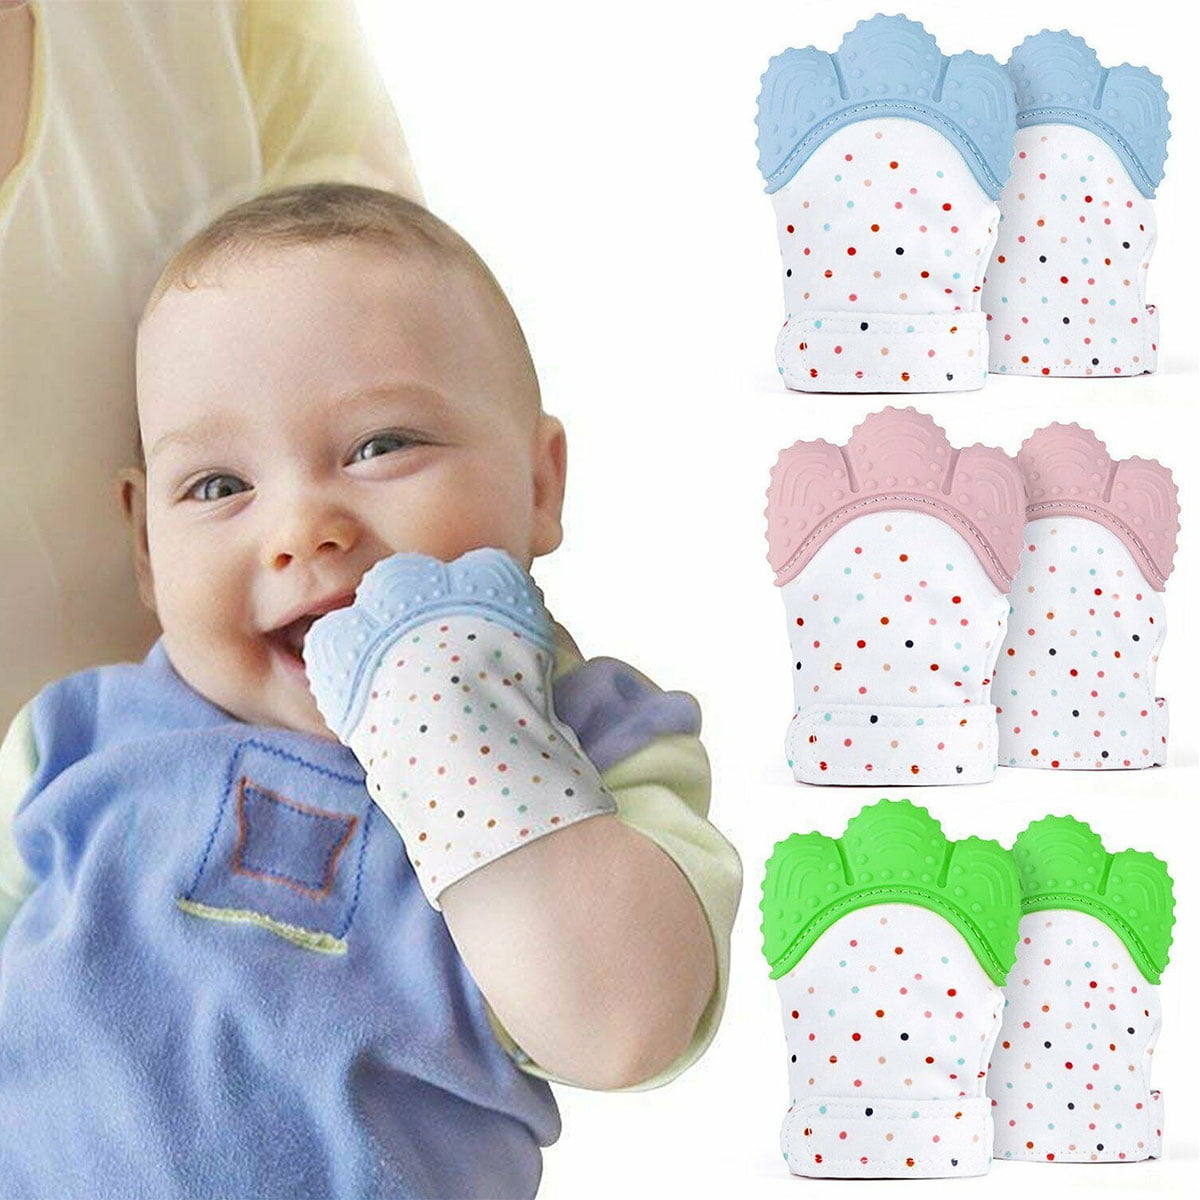 Baby Silicone Mitts Teething Mitten Teething Glove Candy Wrapper Soft Teether 